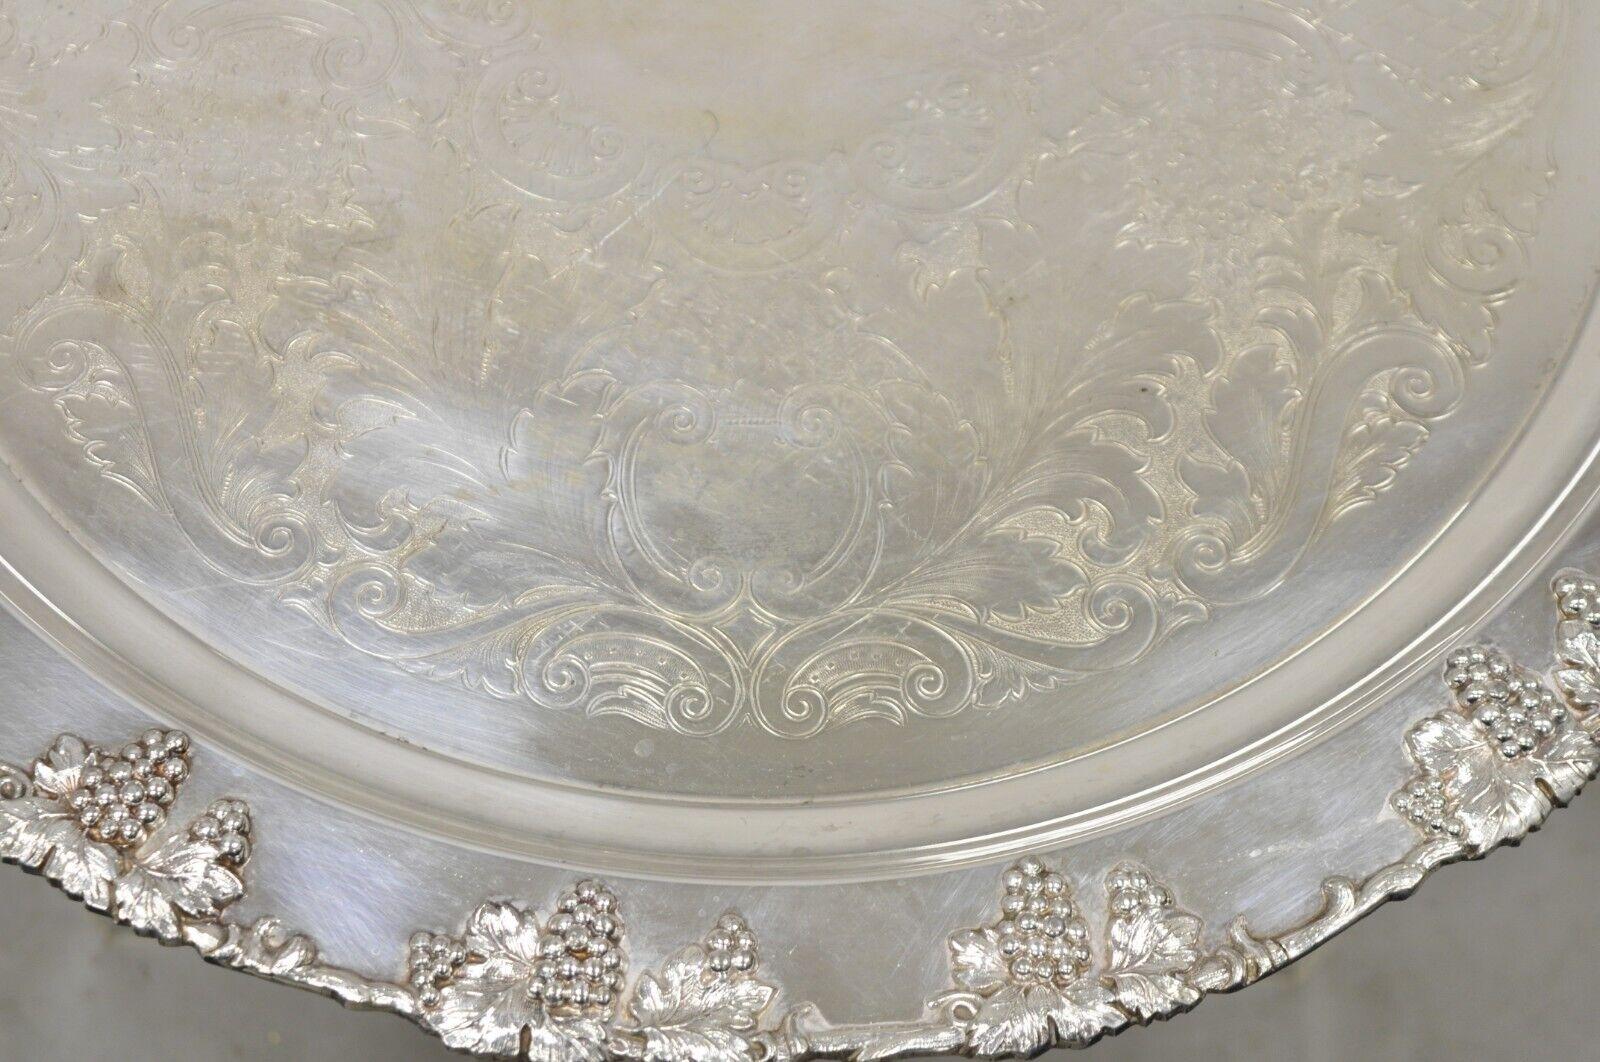 Vtg Crescent Silver Plated Victorian Style Round Etched Serving Platter Tray 4